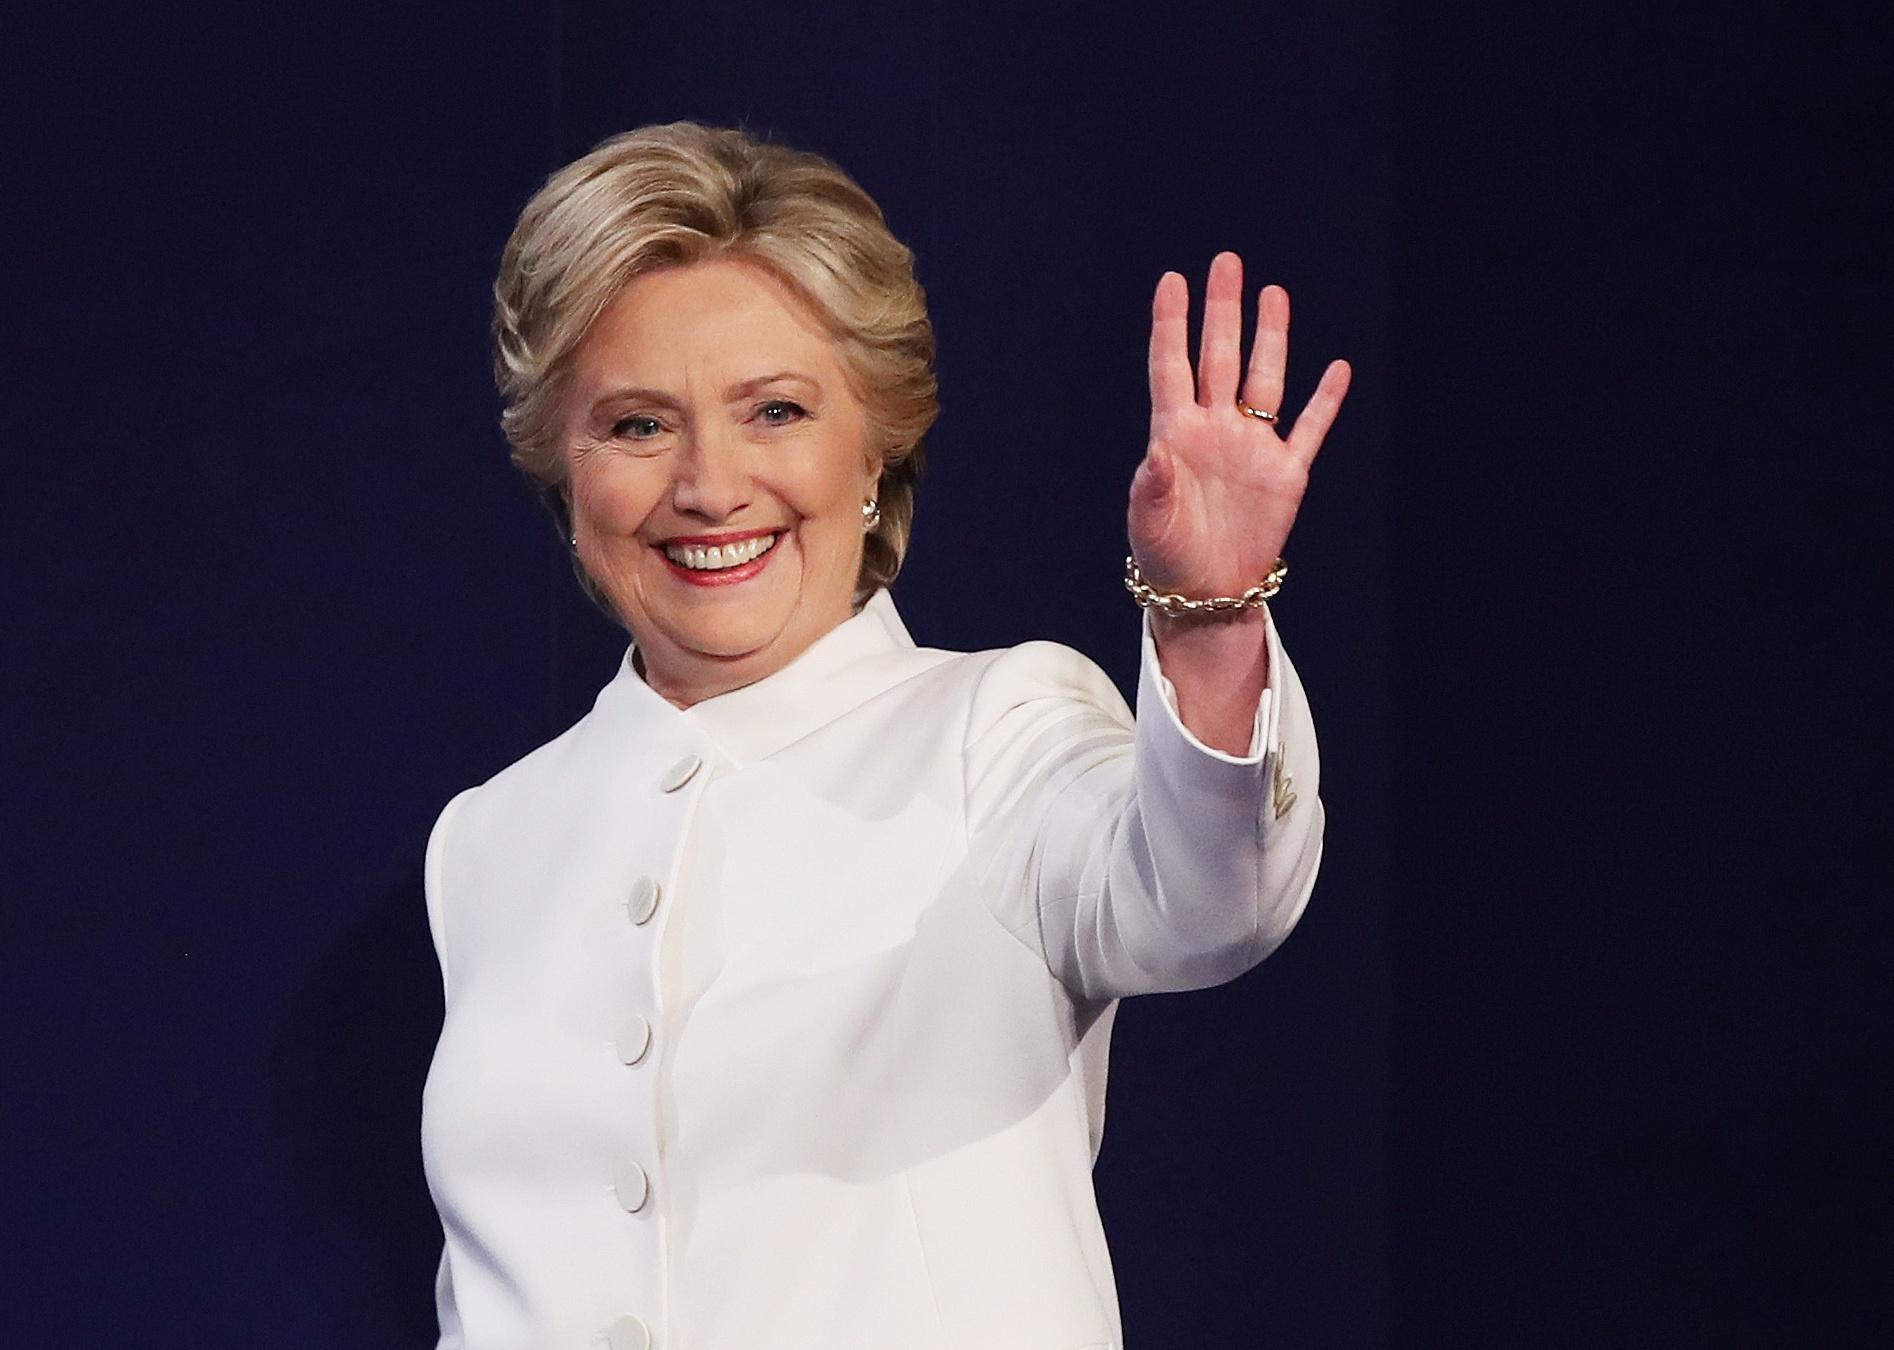 Hillary Clinton onstage in a white suit.